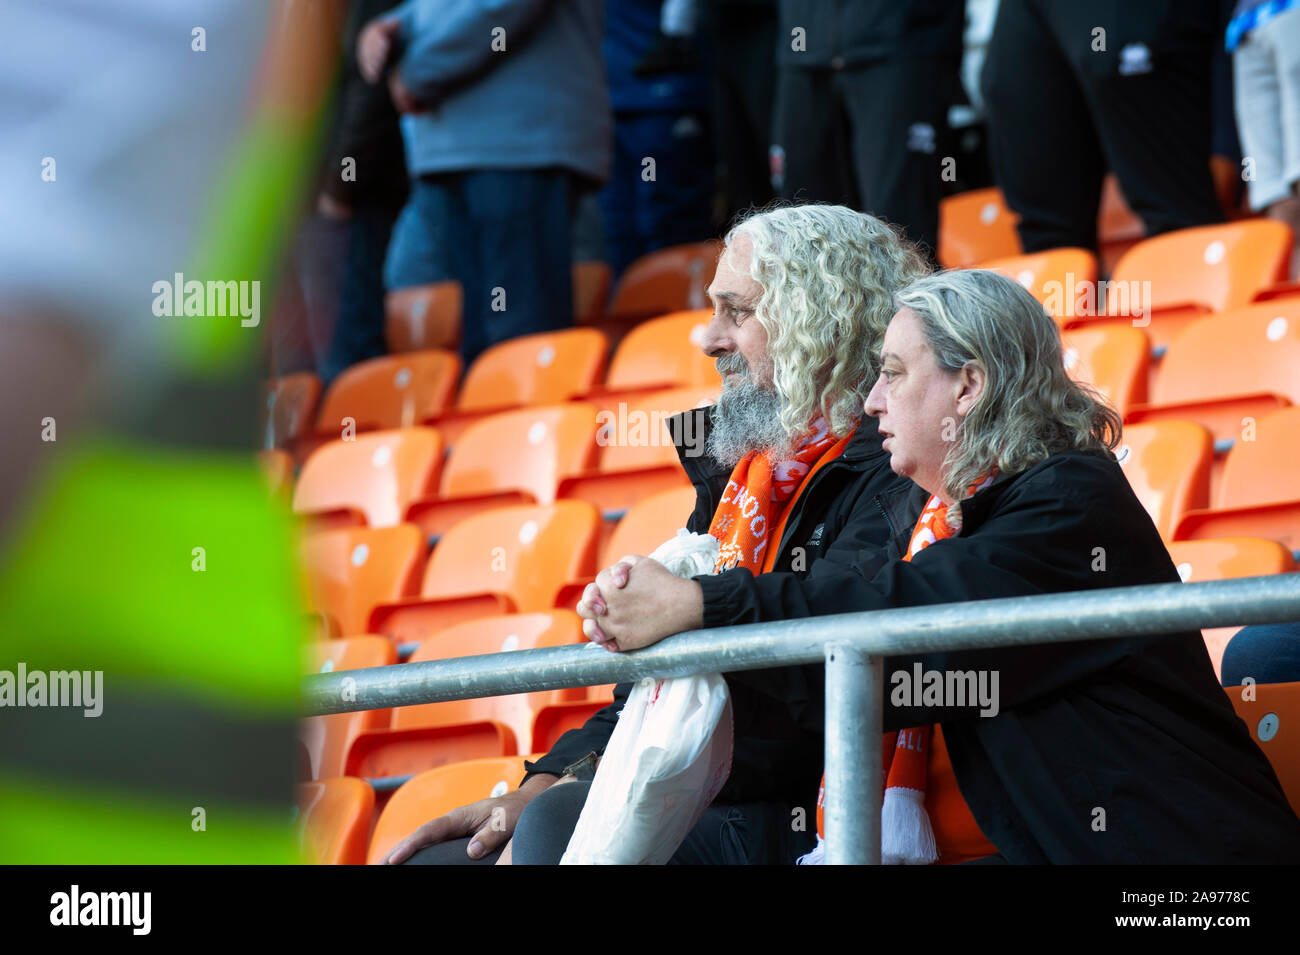 Football Supporters are watching the game at Blackpool Football Club Stock Photo